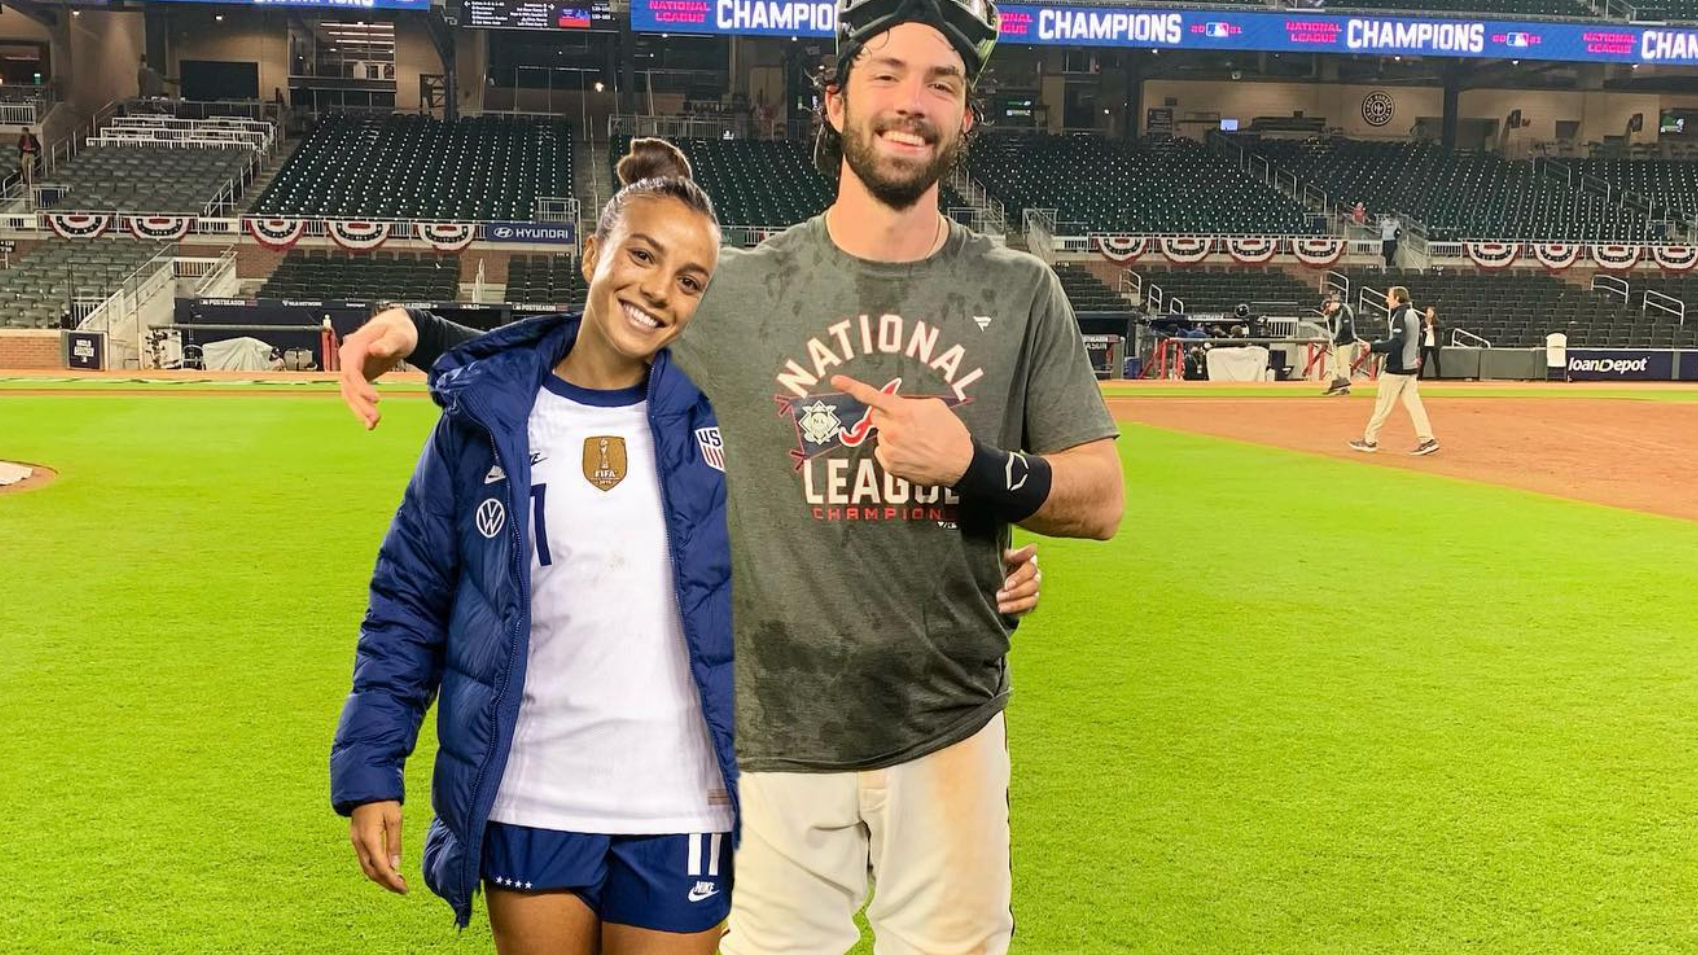 Dansby Swanson talks about Mallory Pugh